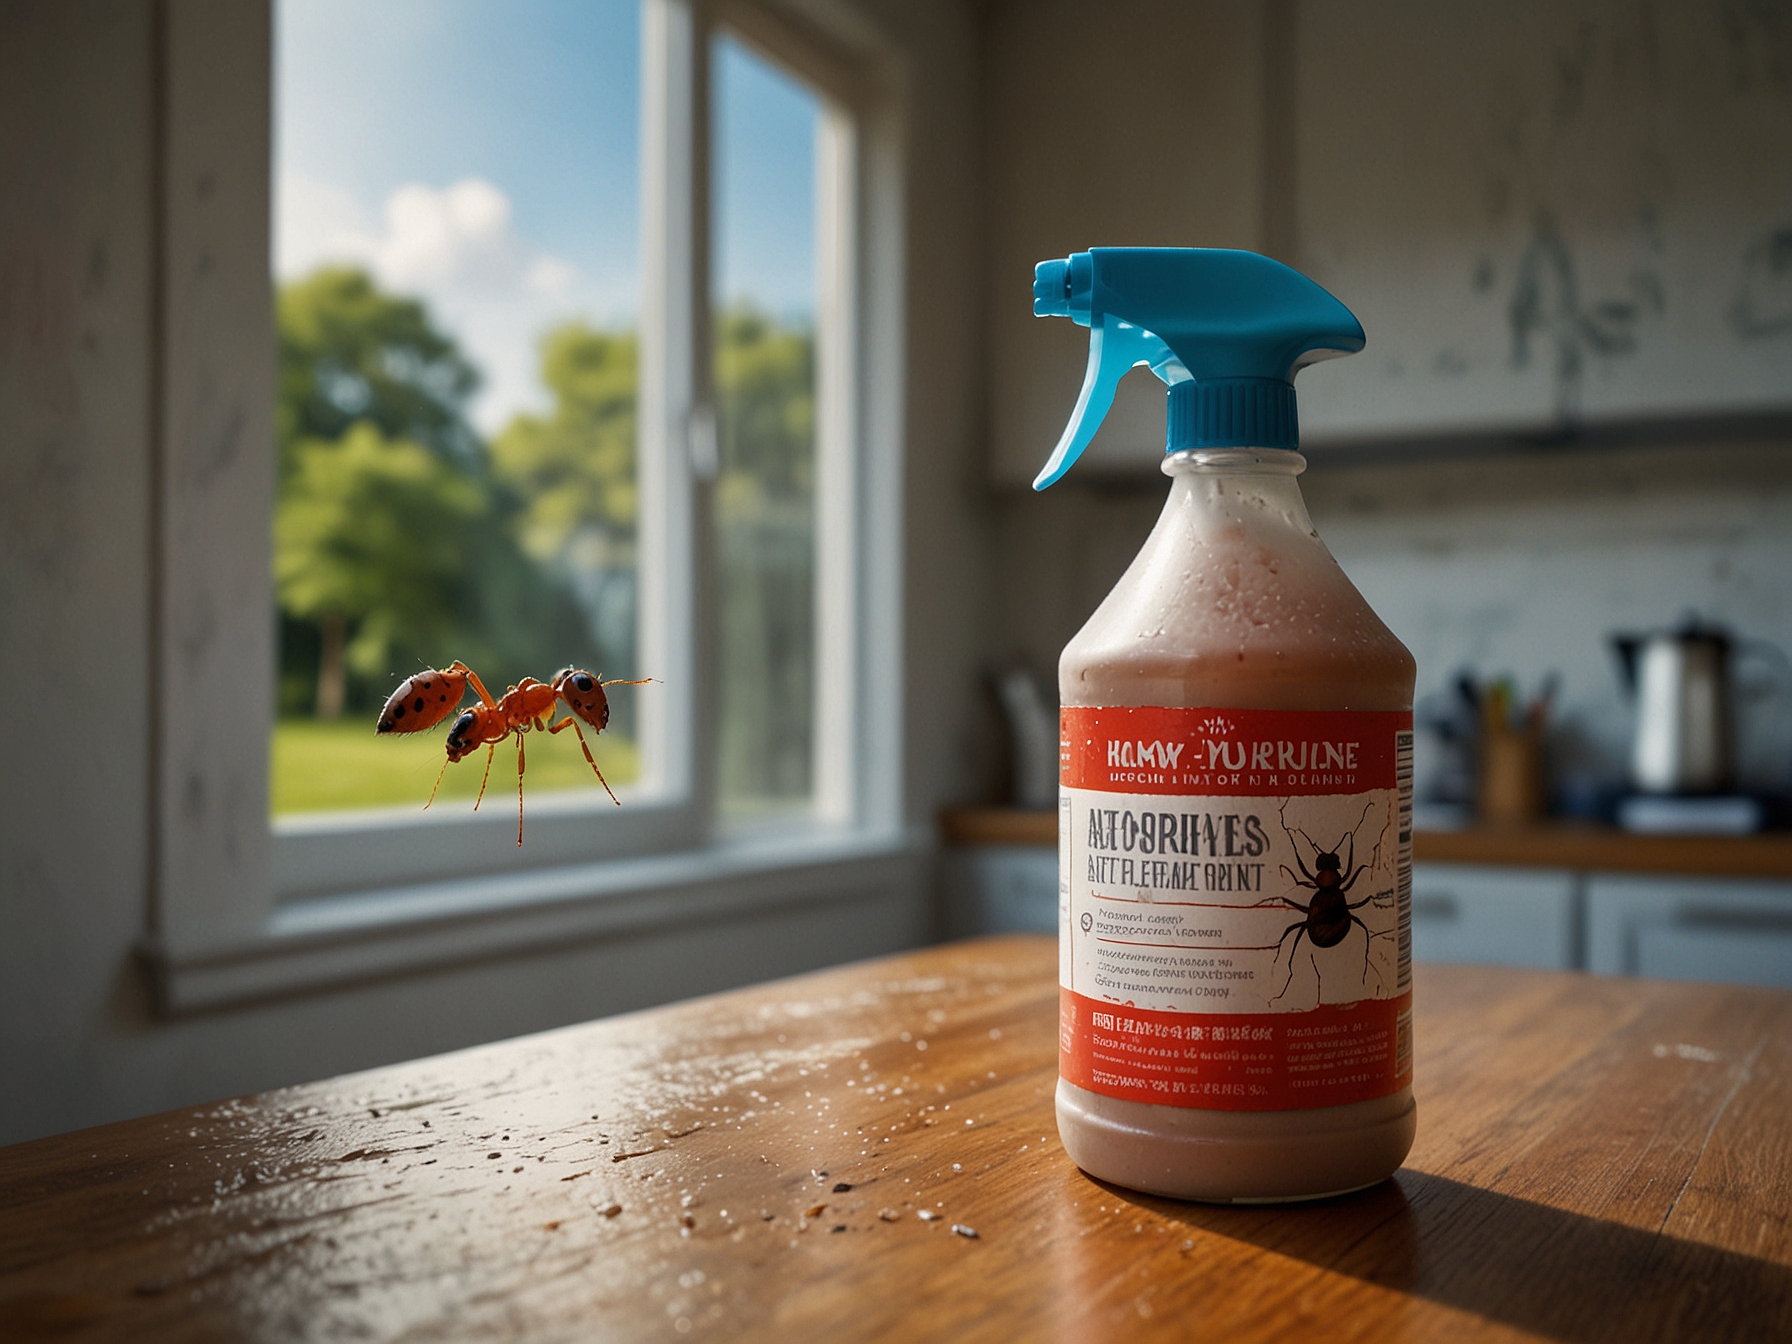 An image showing the homemade ant-repellent spray being applied to kitchen countertops and entry points like door frames and window sills to deter ants effectively.